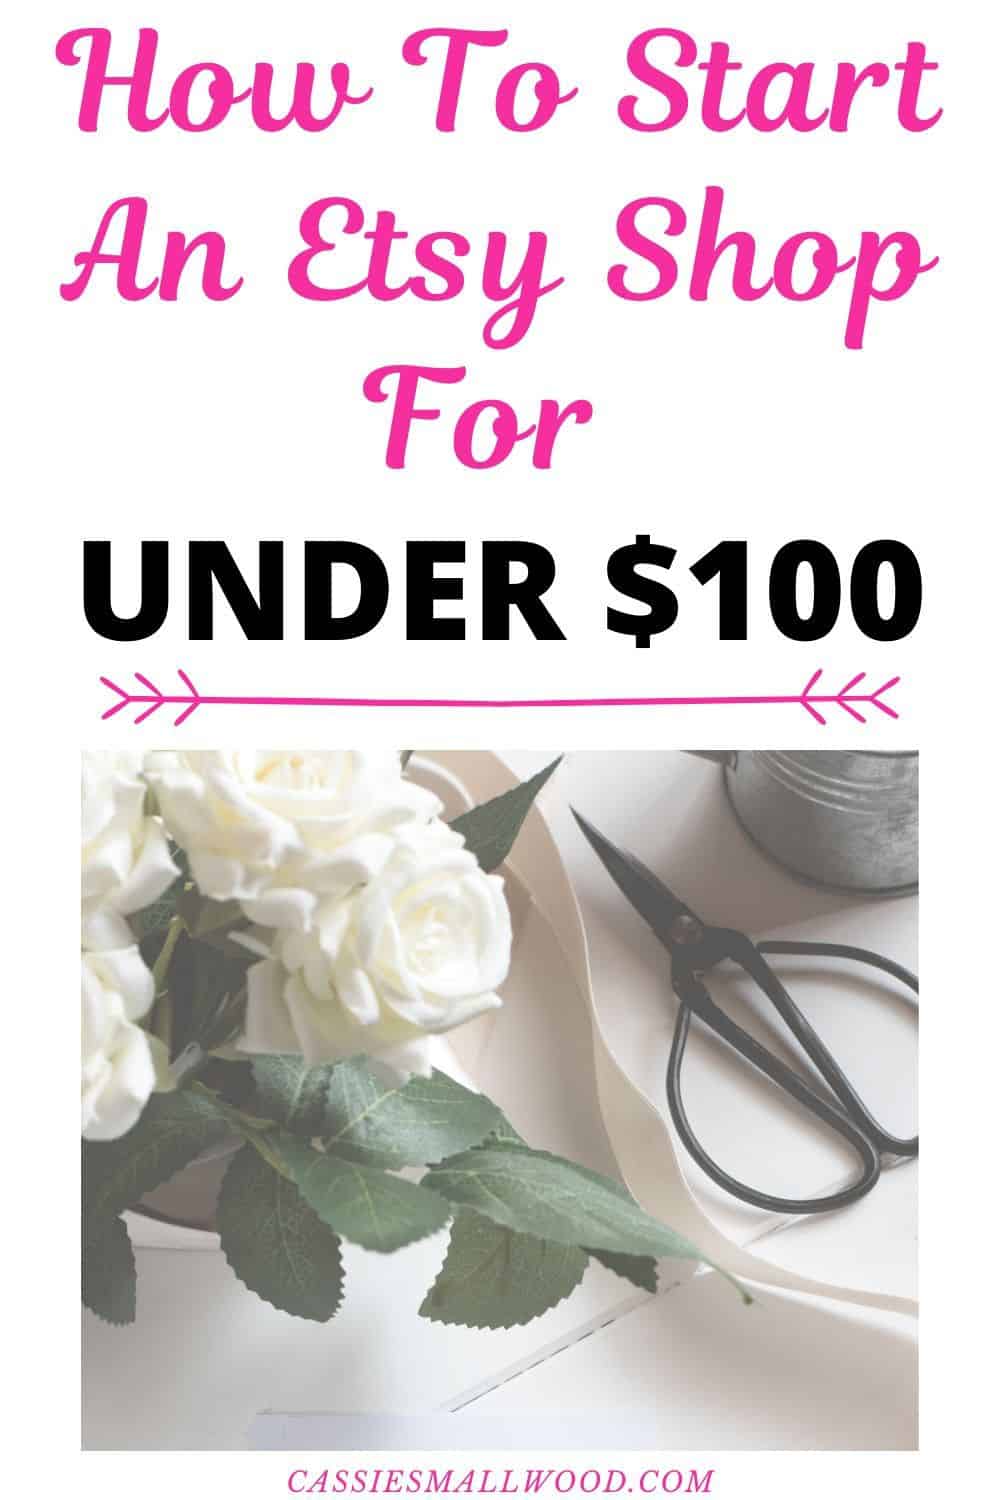 How to start selling on Etsy for under $100. Ideas to find the right products and items to sell whether you want to sell handmade crafts or printables. Ways to find what to sell on Etsy with low cost so you can start your Etsy shop on a budget. Save money on marketing materials, shipping and packaging to get your small business started right in 2020. #sellingonetsy #etsysellertips